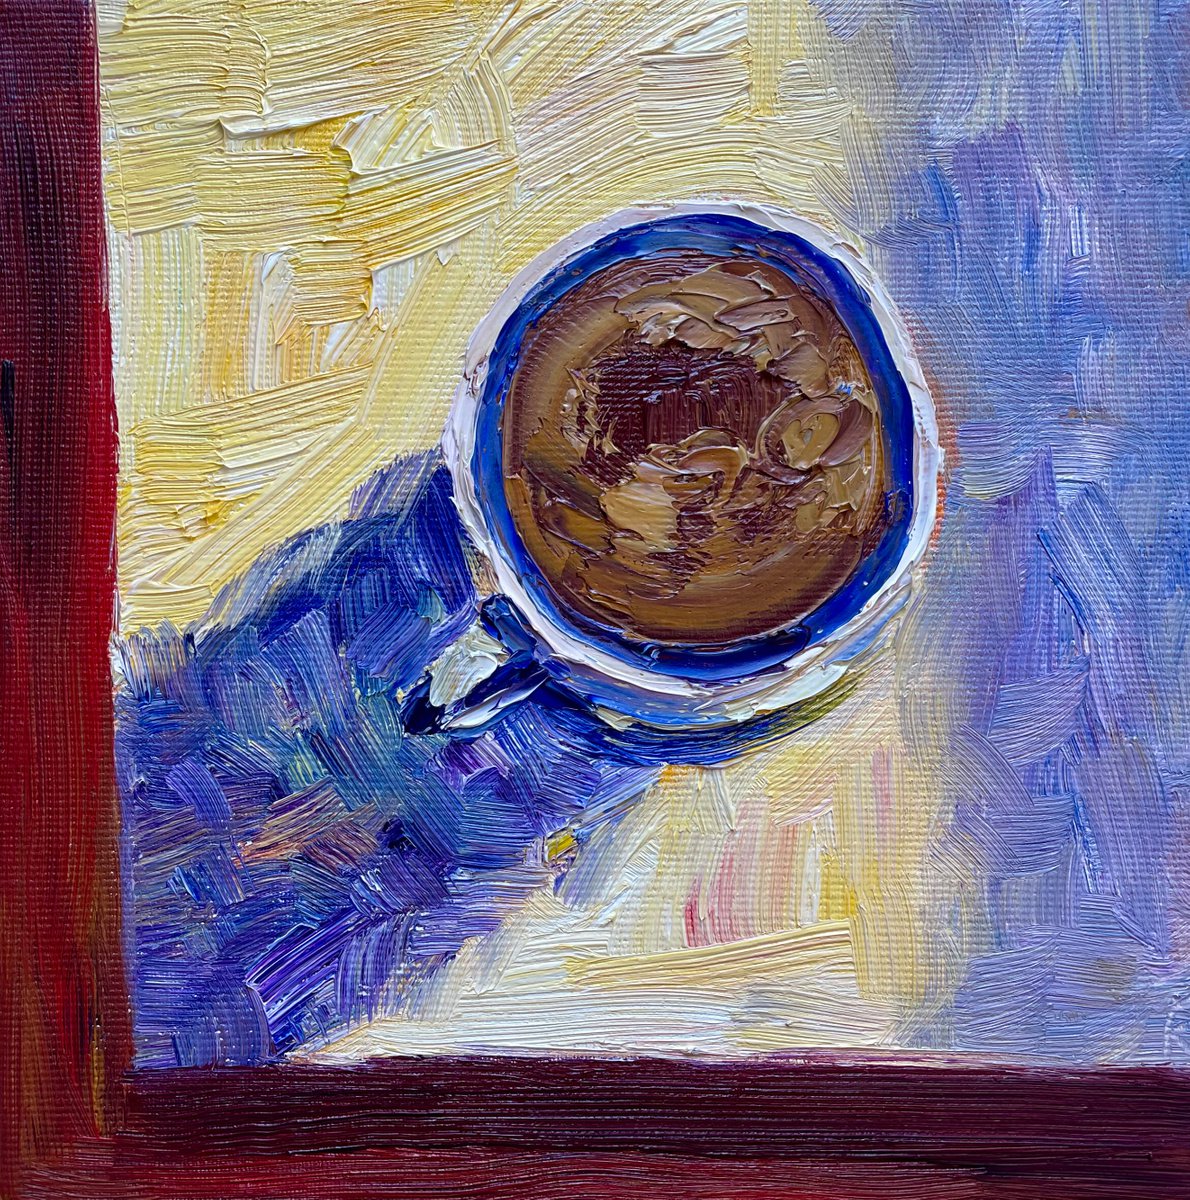 Coffee Oil Painting on Canvas, Small Original Artwork, Kitchen Wall Art, Cafe Decor, Coffe... by Kate Grishakova